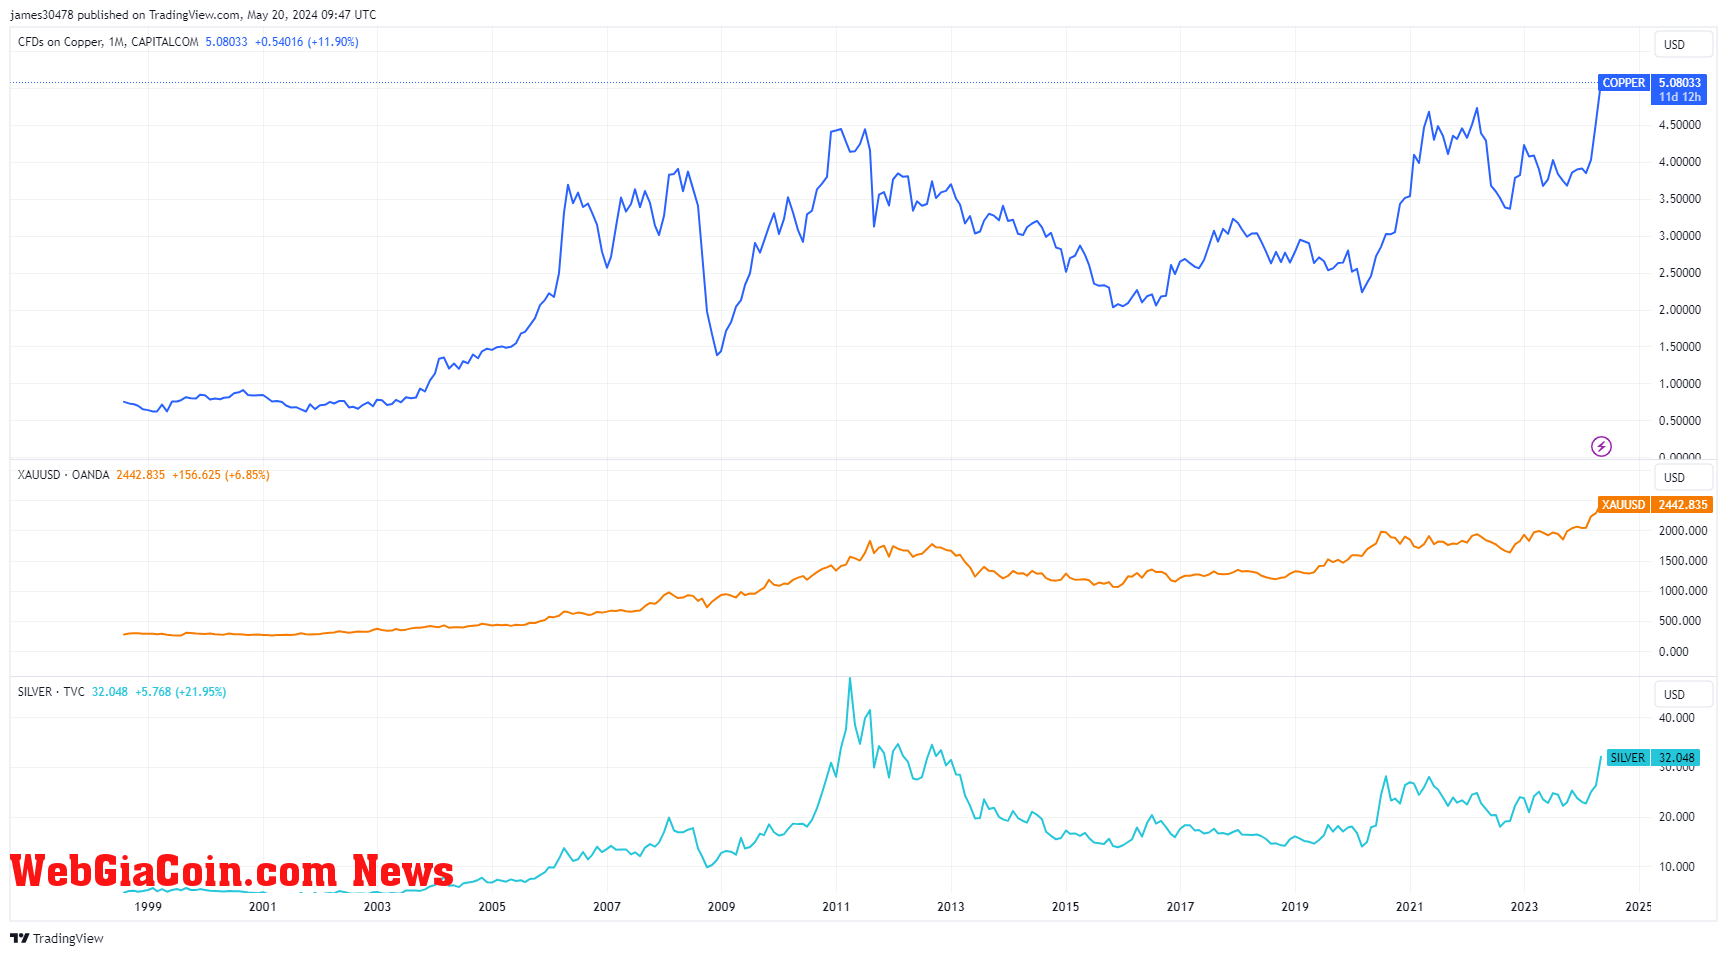 Gold, Silver and Copper Price: (Source: TradingView)